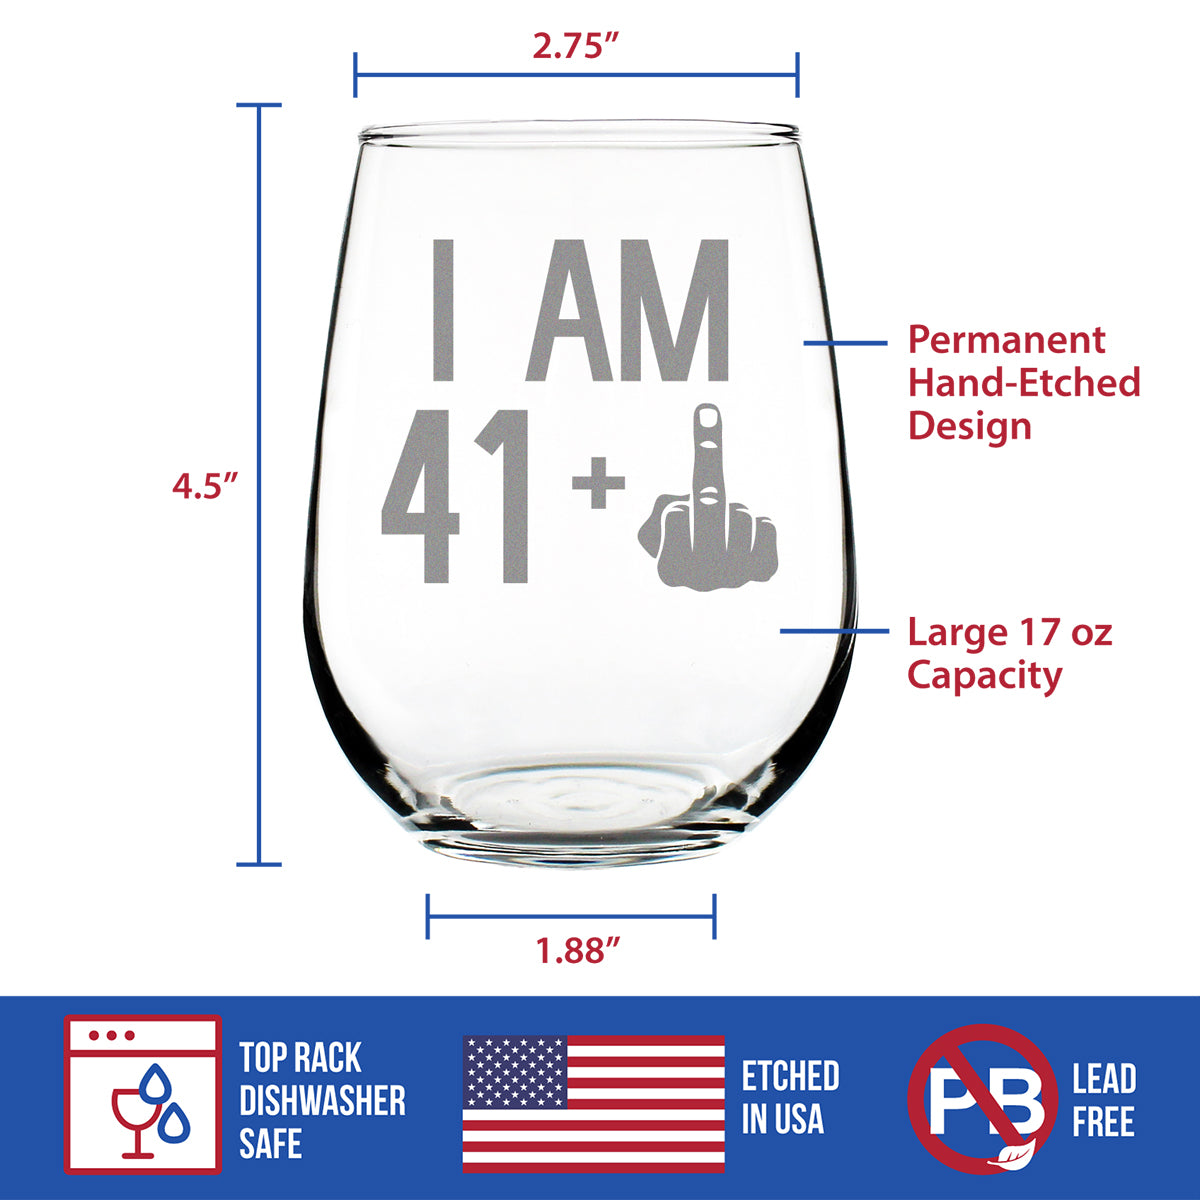 41 + 1 Middle Finger - 42nd Birthday Stemless Wine Glass - Funny Glass for Men and Women Turning 42 - Large Size Wine Glass